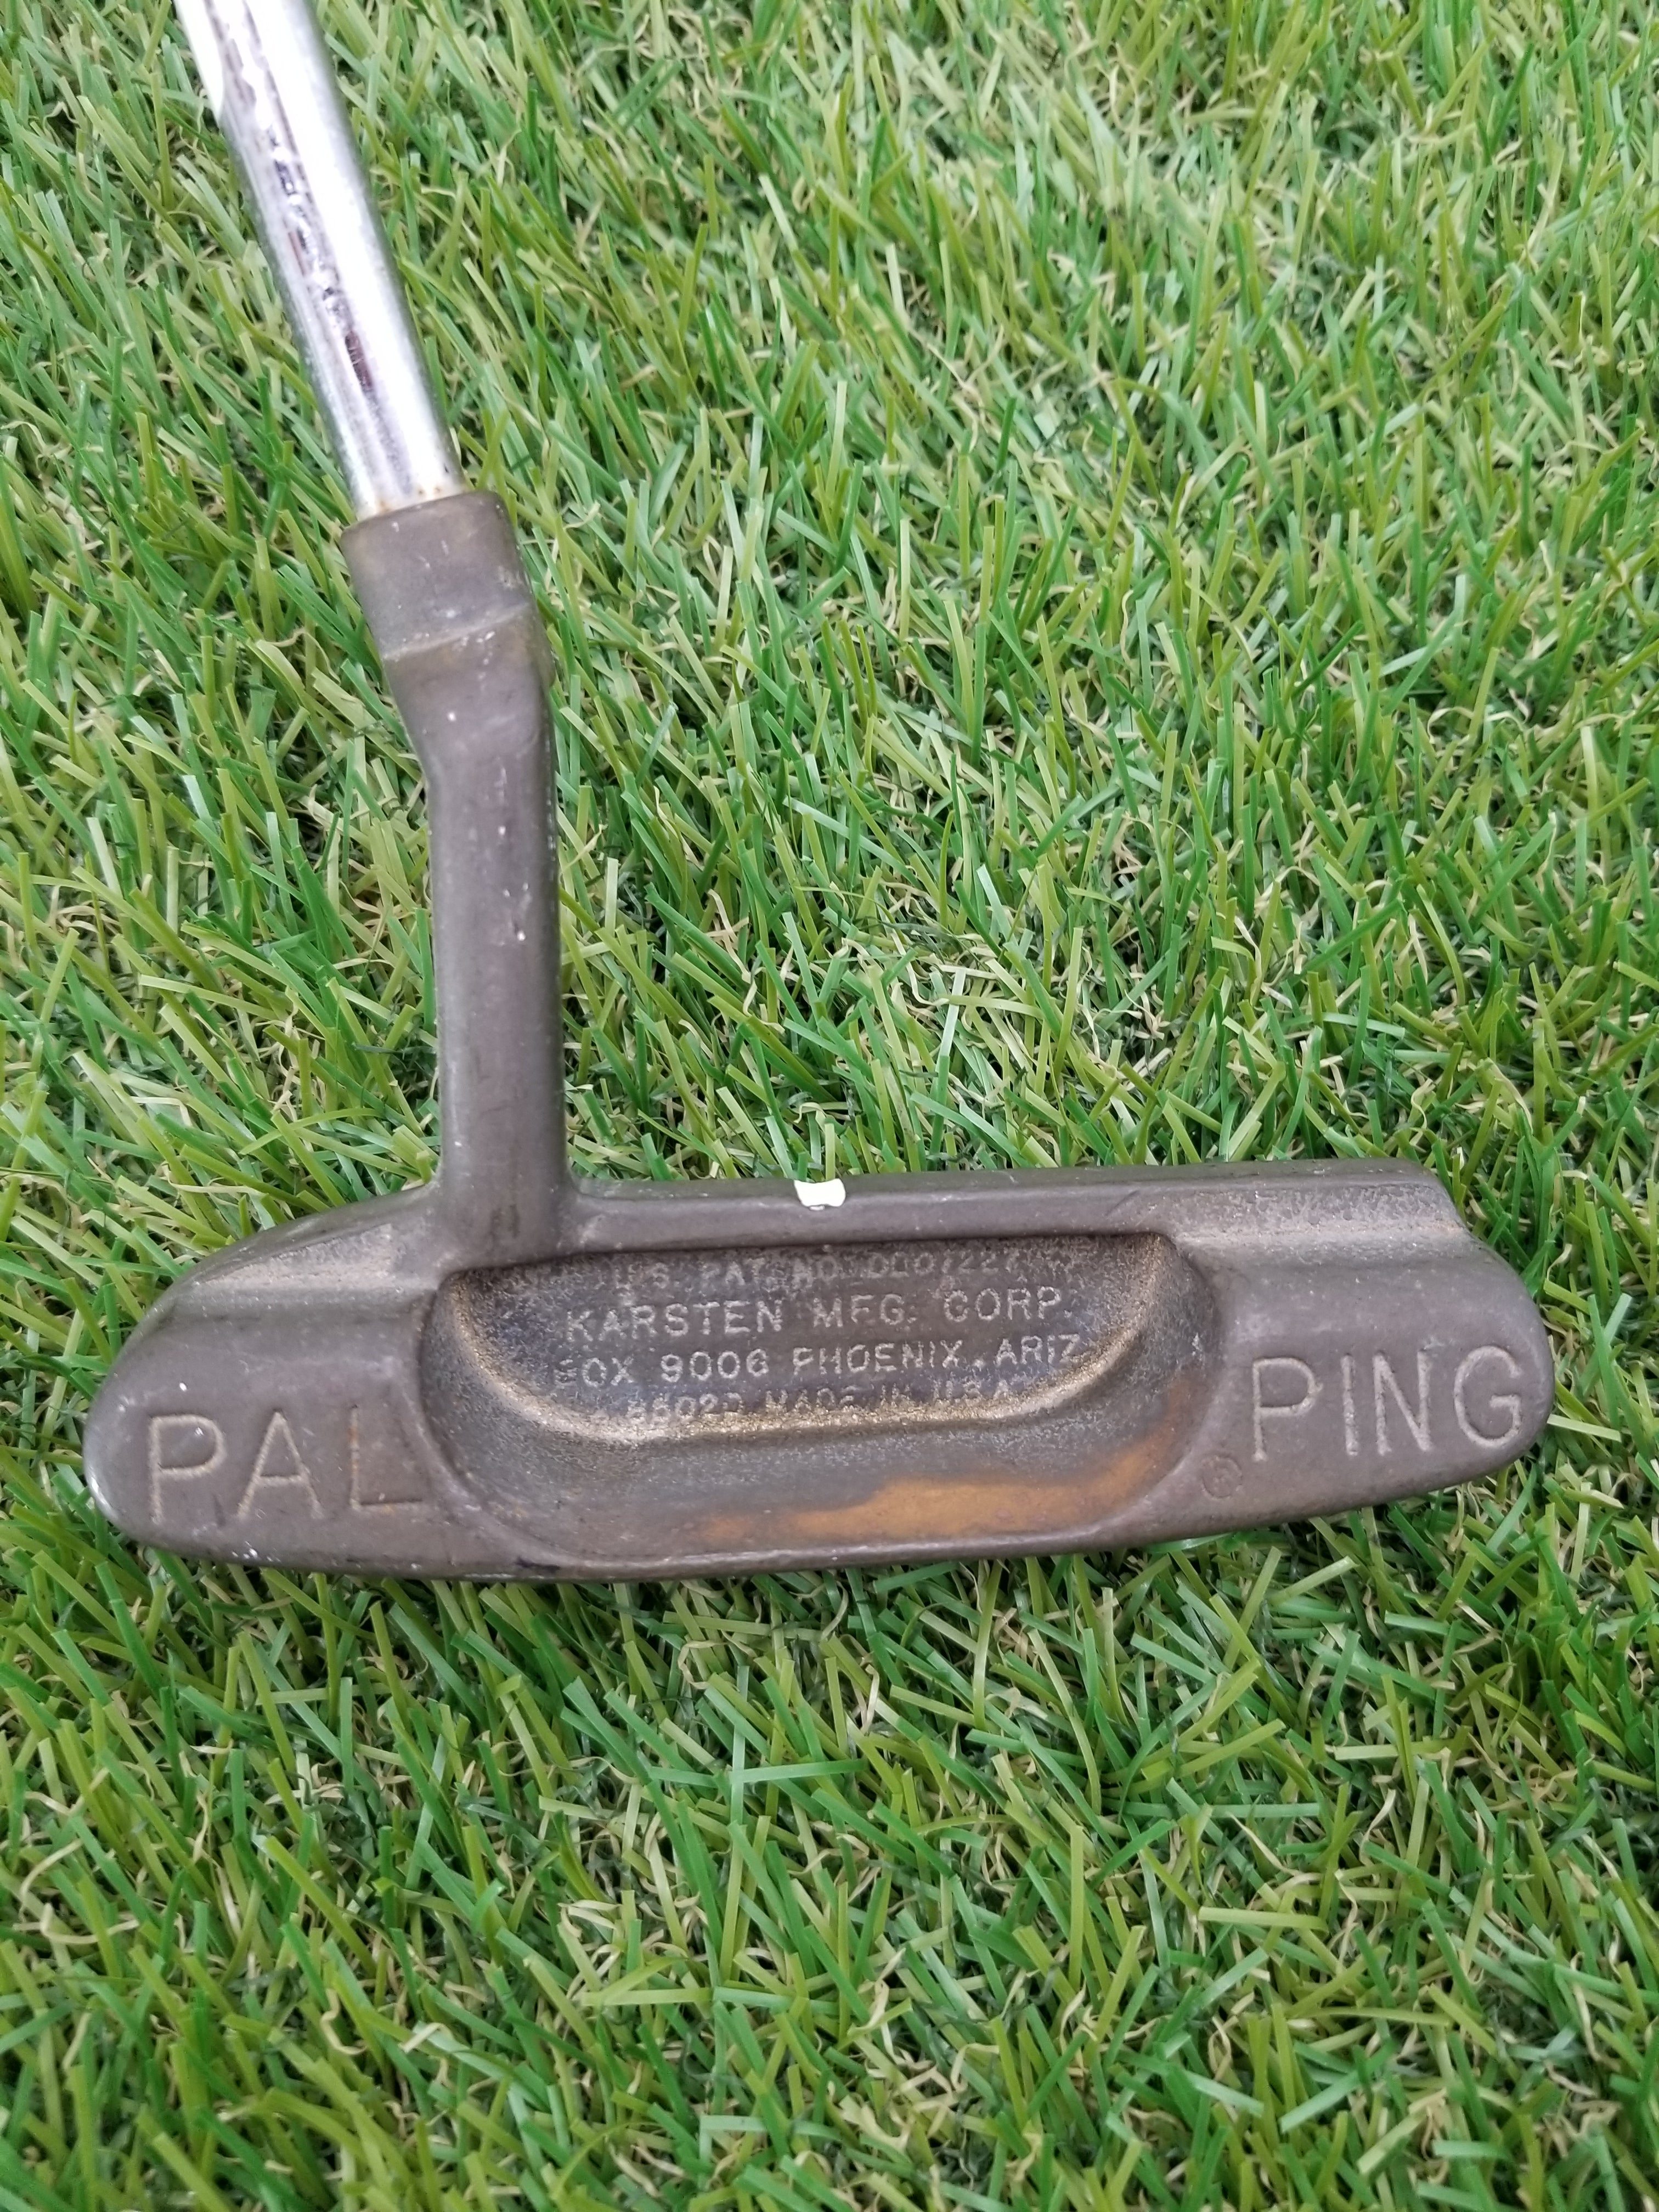 PING PAL PUTTER KARSTEN 85020 PING GOLF PRIDE GRIP STD 35.5 GOOD –  Purchase and Resell